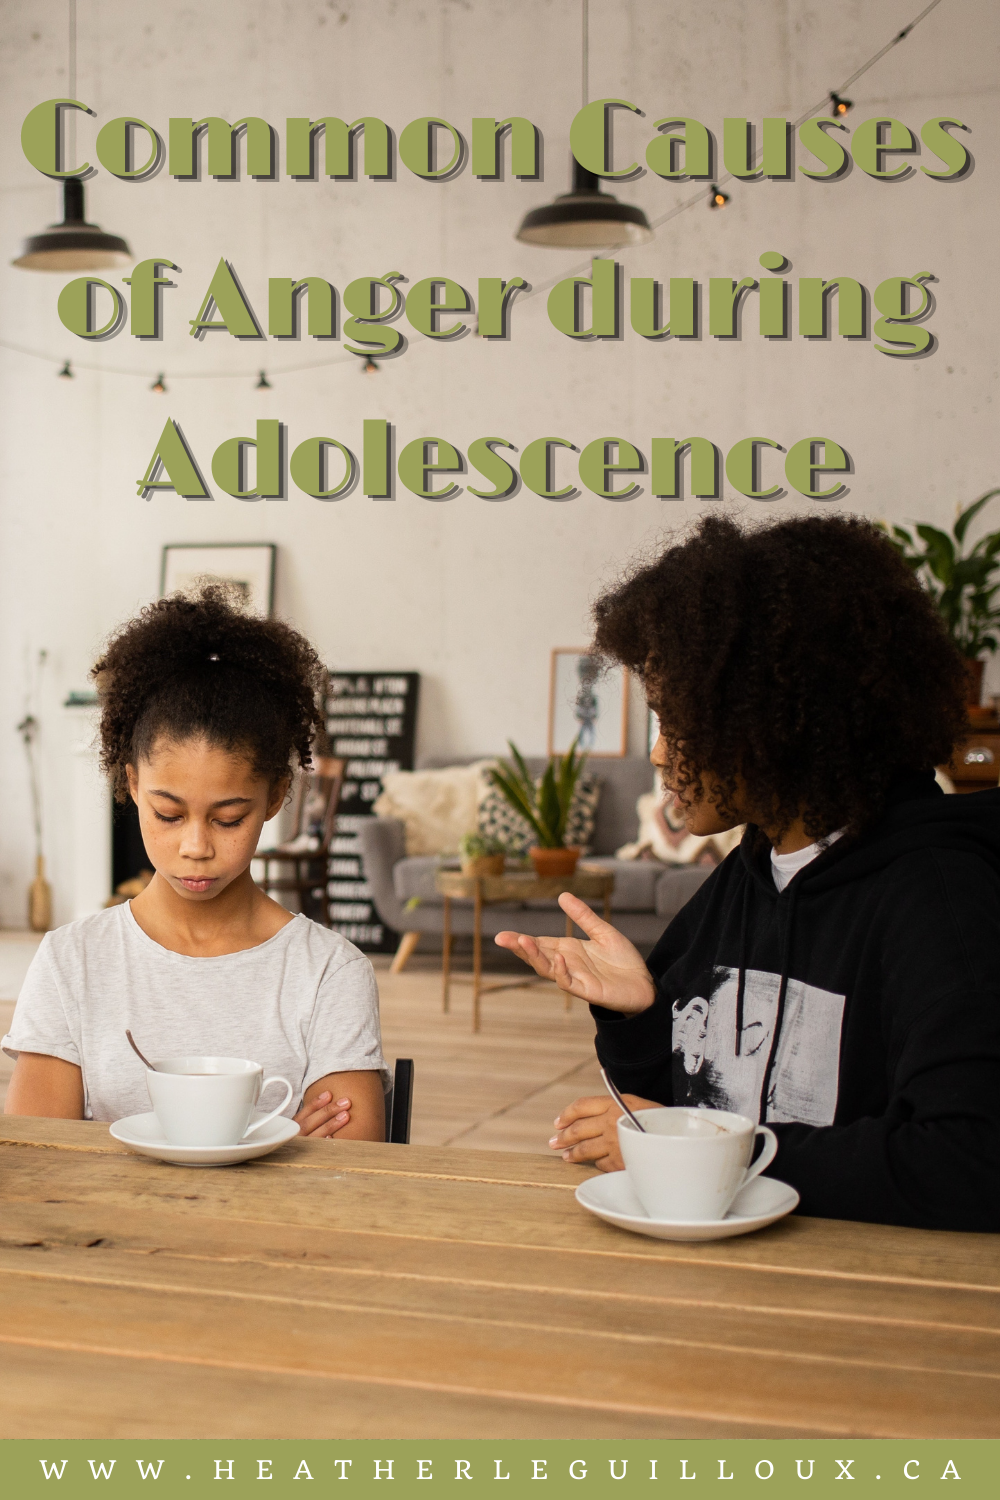 The adolescent stage of life is comes with many new emotions, changes and new discoveries about oneself and the world. Adolescence is the time for sexual maturation and growth spurts, and it comes with its emotional rollercoaster. During this period, teenagers often deal with strong, volatile emotions, one of which is anger. Learn about common causes of teenage anger and how to overcome them. #teens #teenage #anger #angry #adolescent #adolescence #familyconflict #selfesteem #bullying